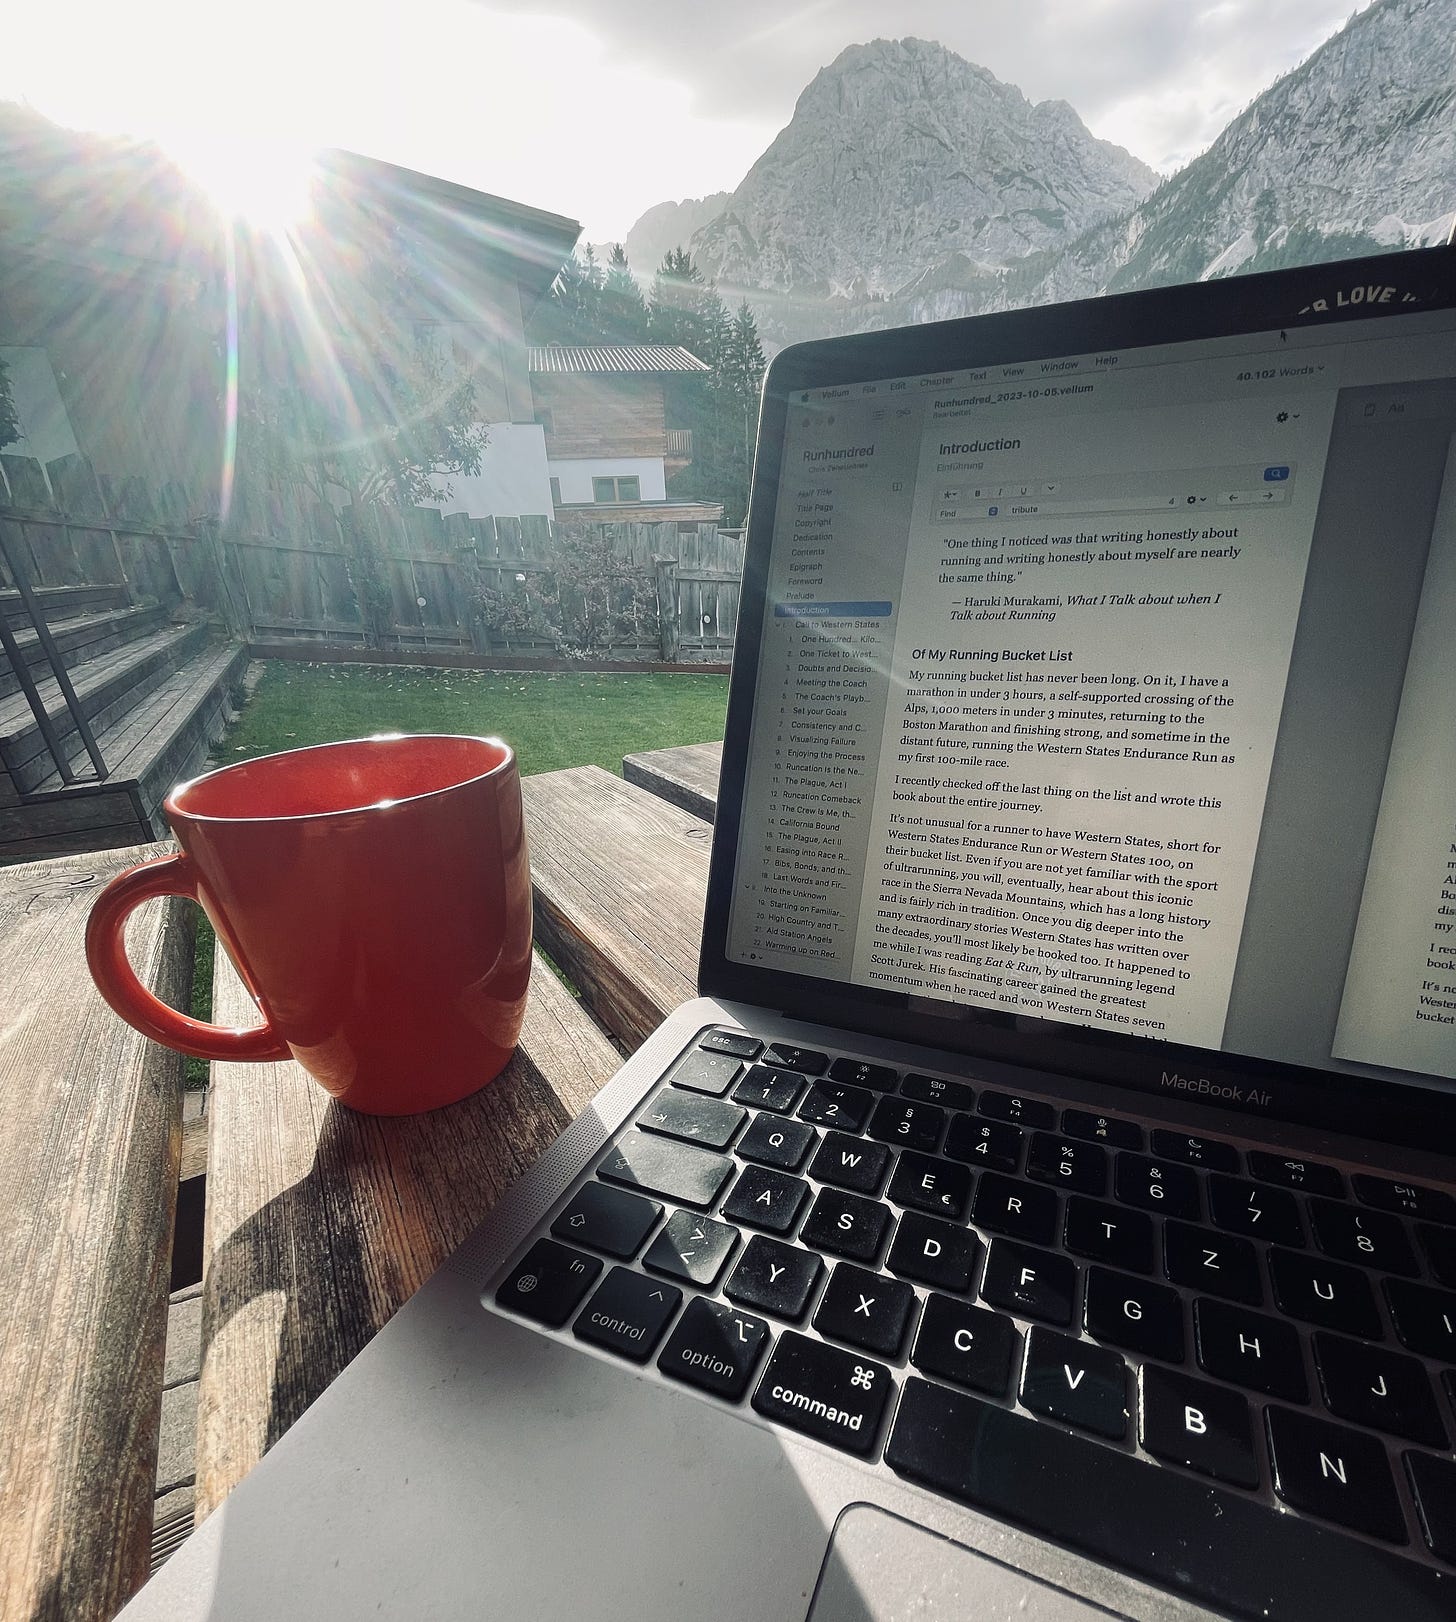 The author's macbook on a table with mountains in the background and a coffee mug